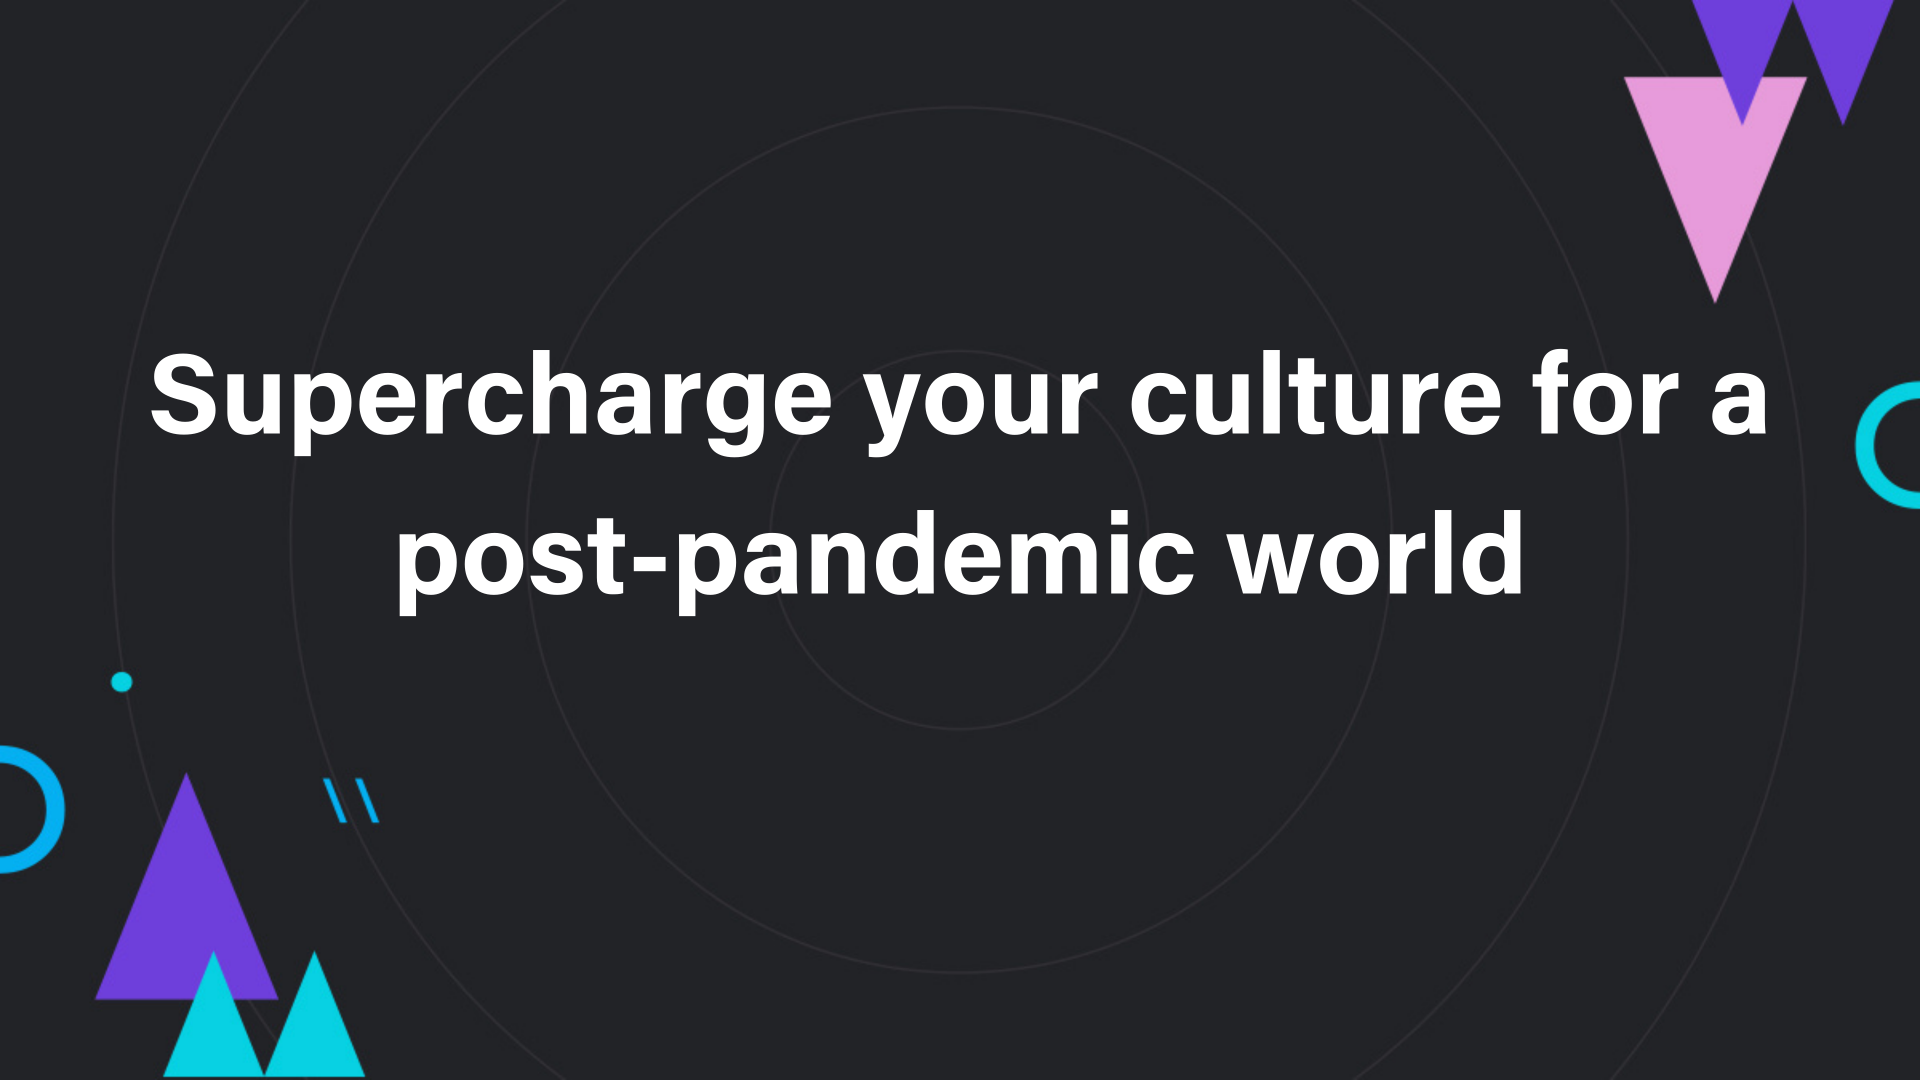 Supercharge your culture in a post-pandemic world